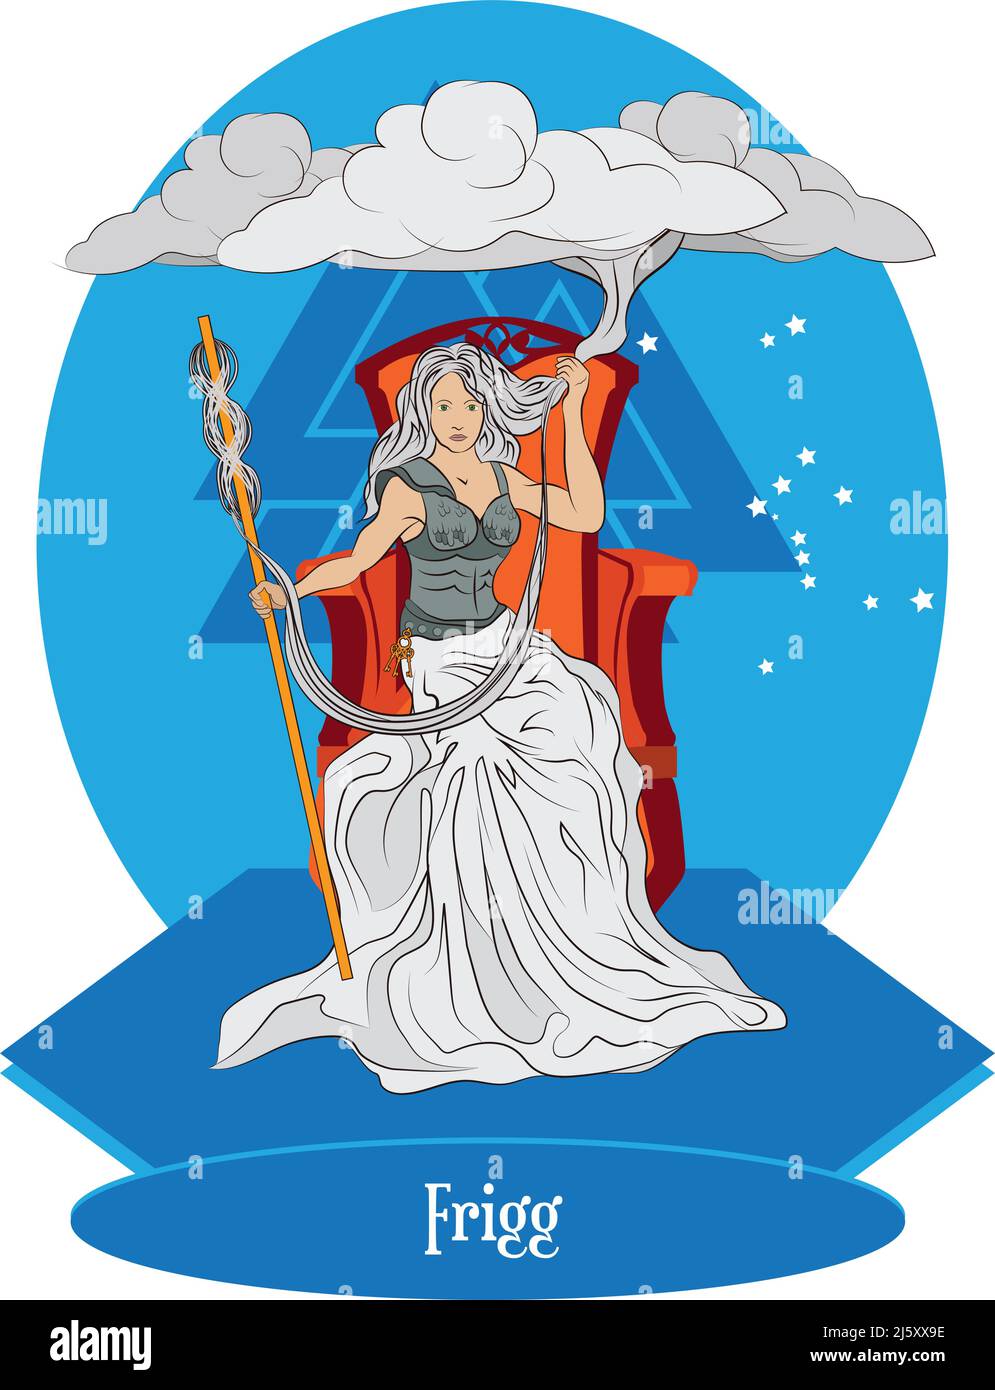 Illustration vector isolated of Norse or Scandinavian mythical goddess Frigg Stock Vector